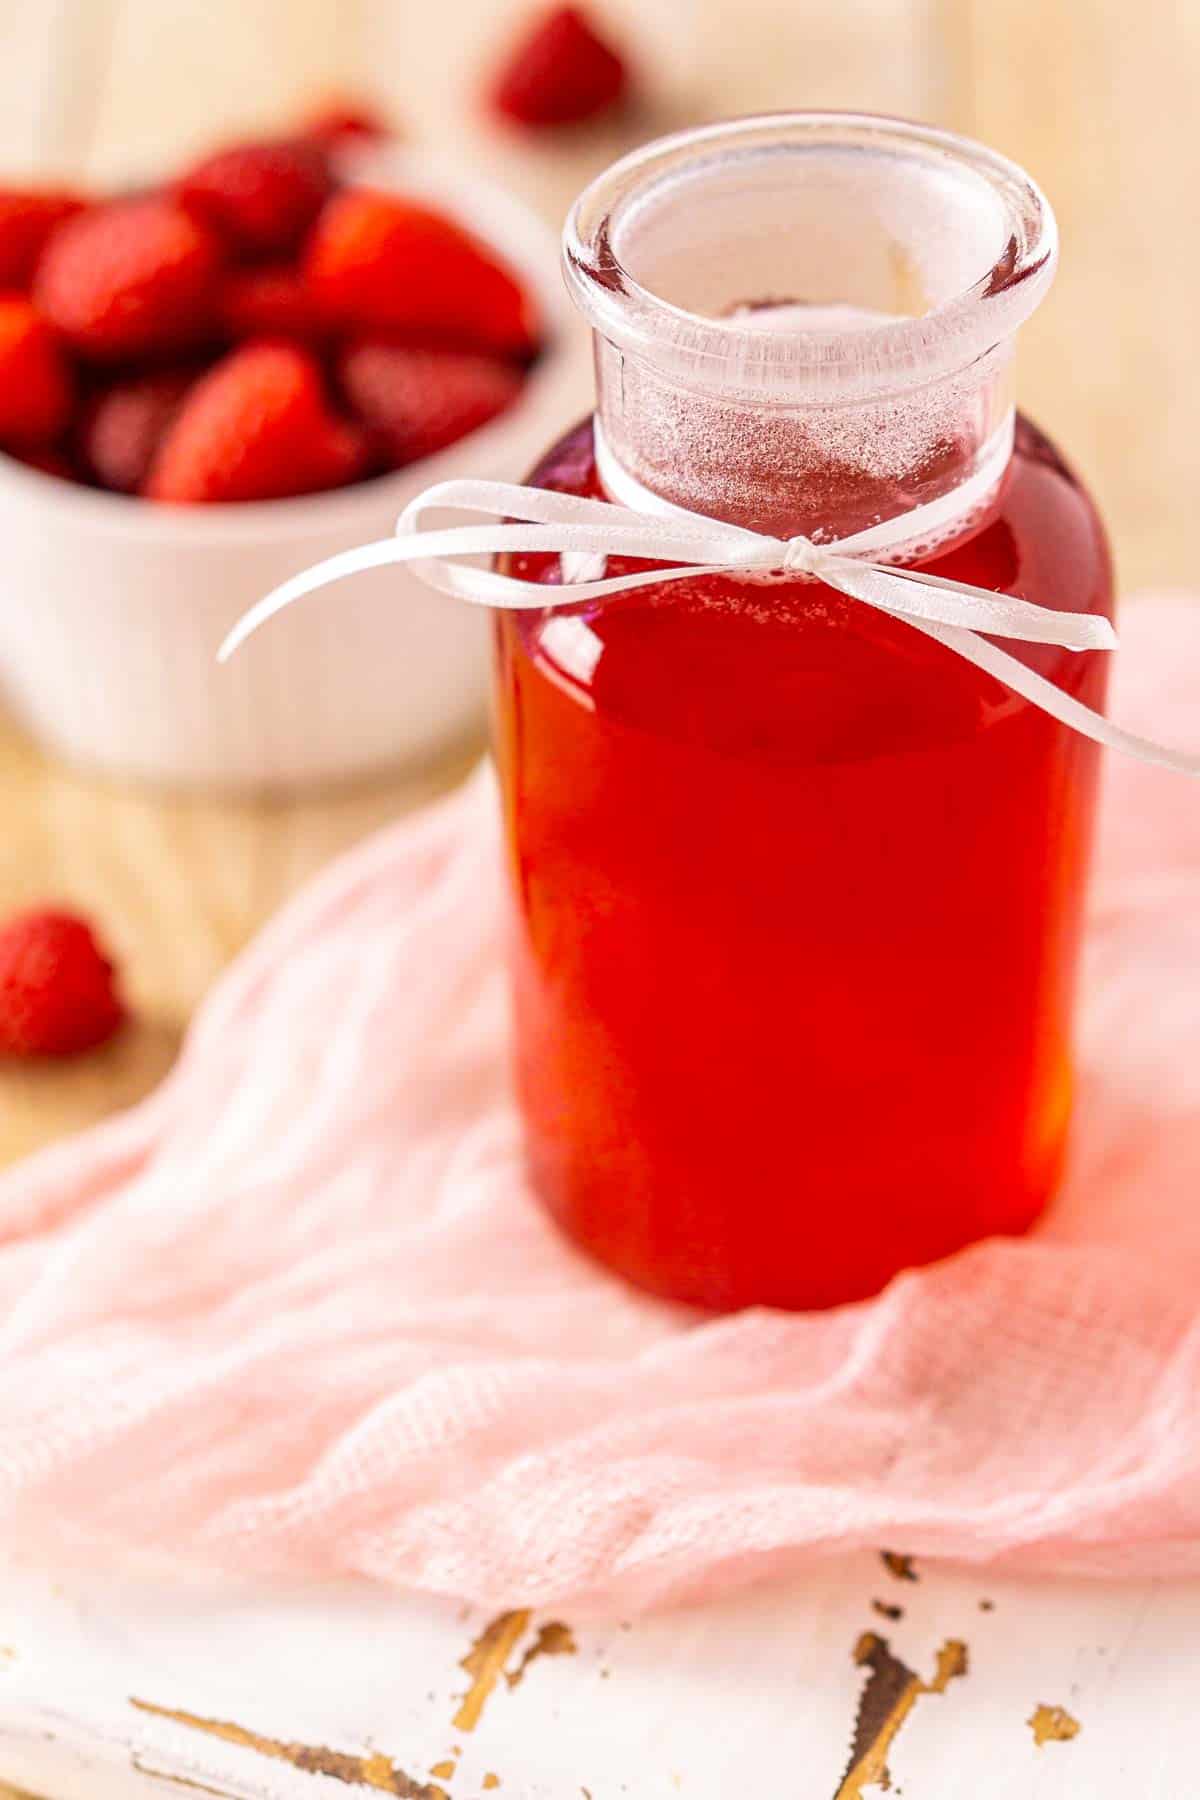 A close-up of the raspberry simple syrup in a glass jar on a white wooden tray with a piece of pink clothe.